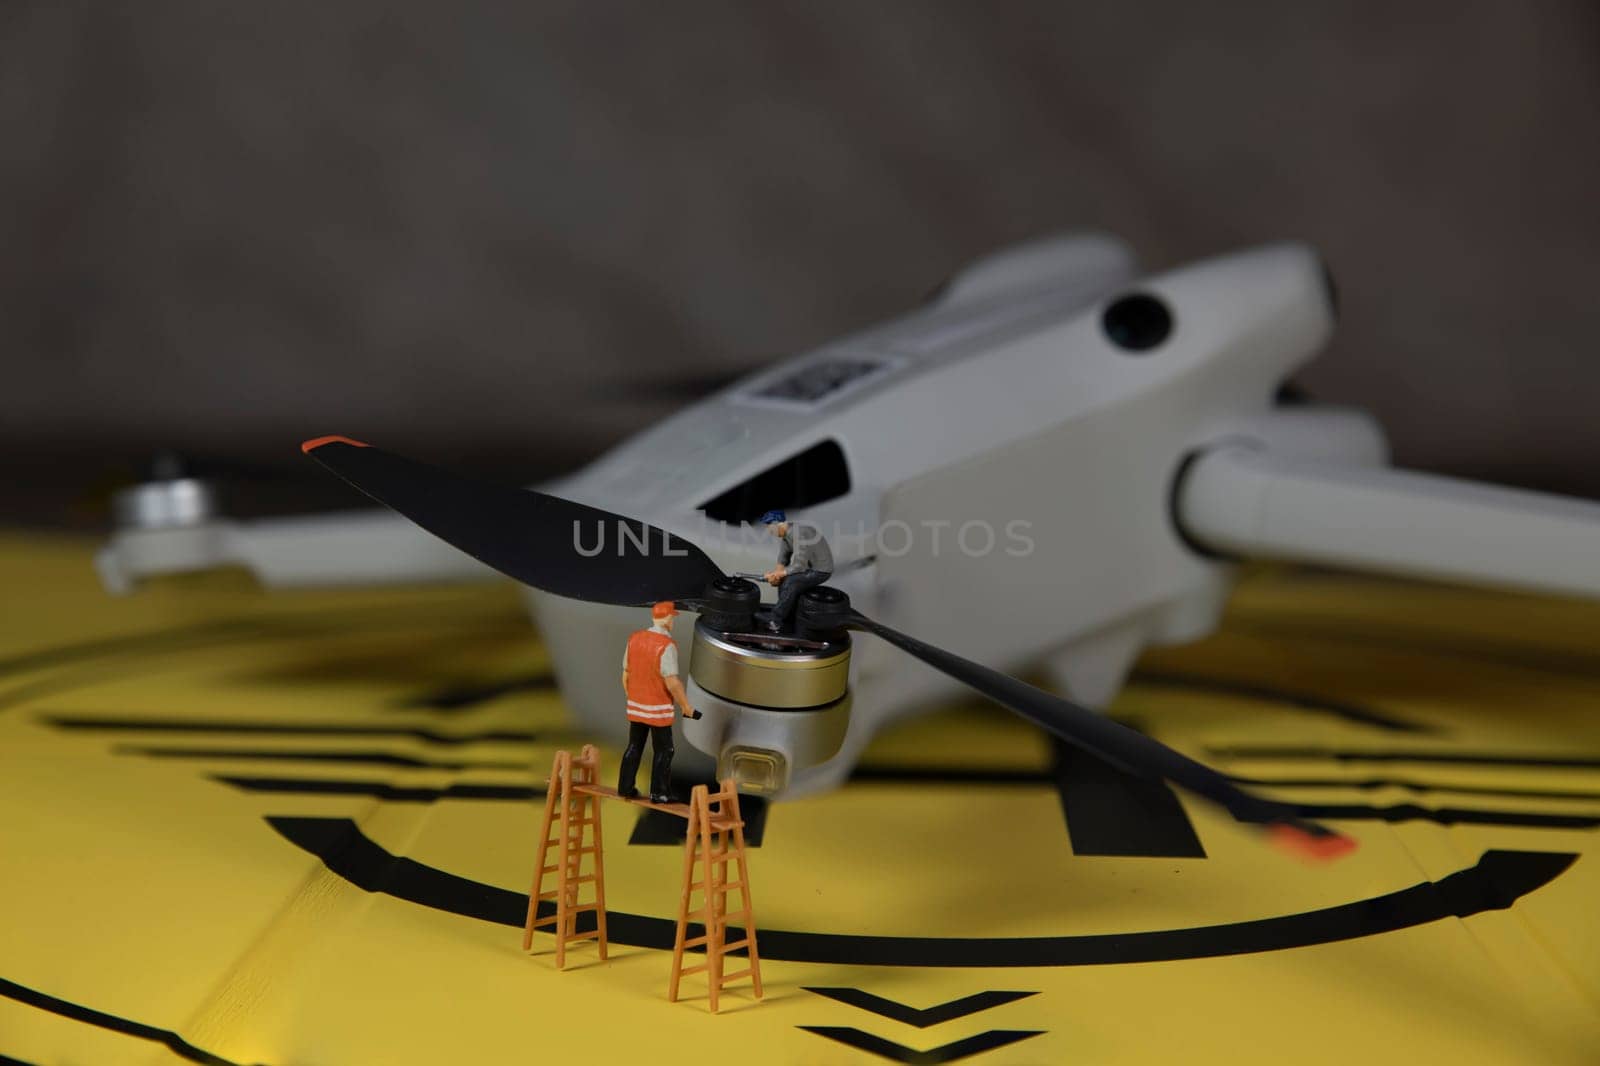 miniature figures checking the working of the drone propeller by compuinfoto